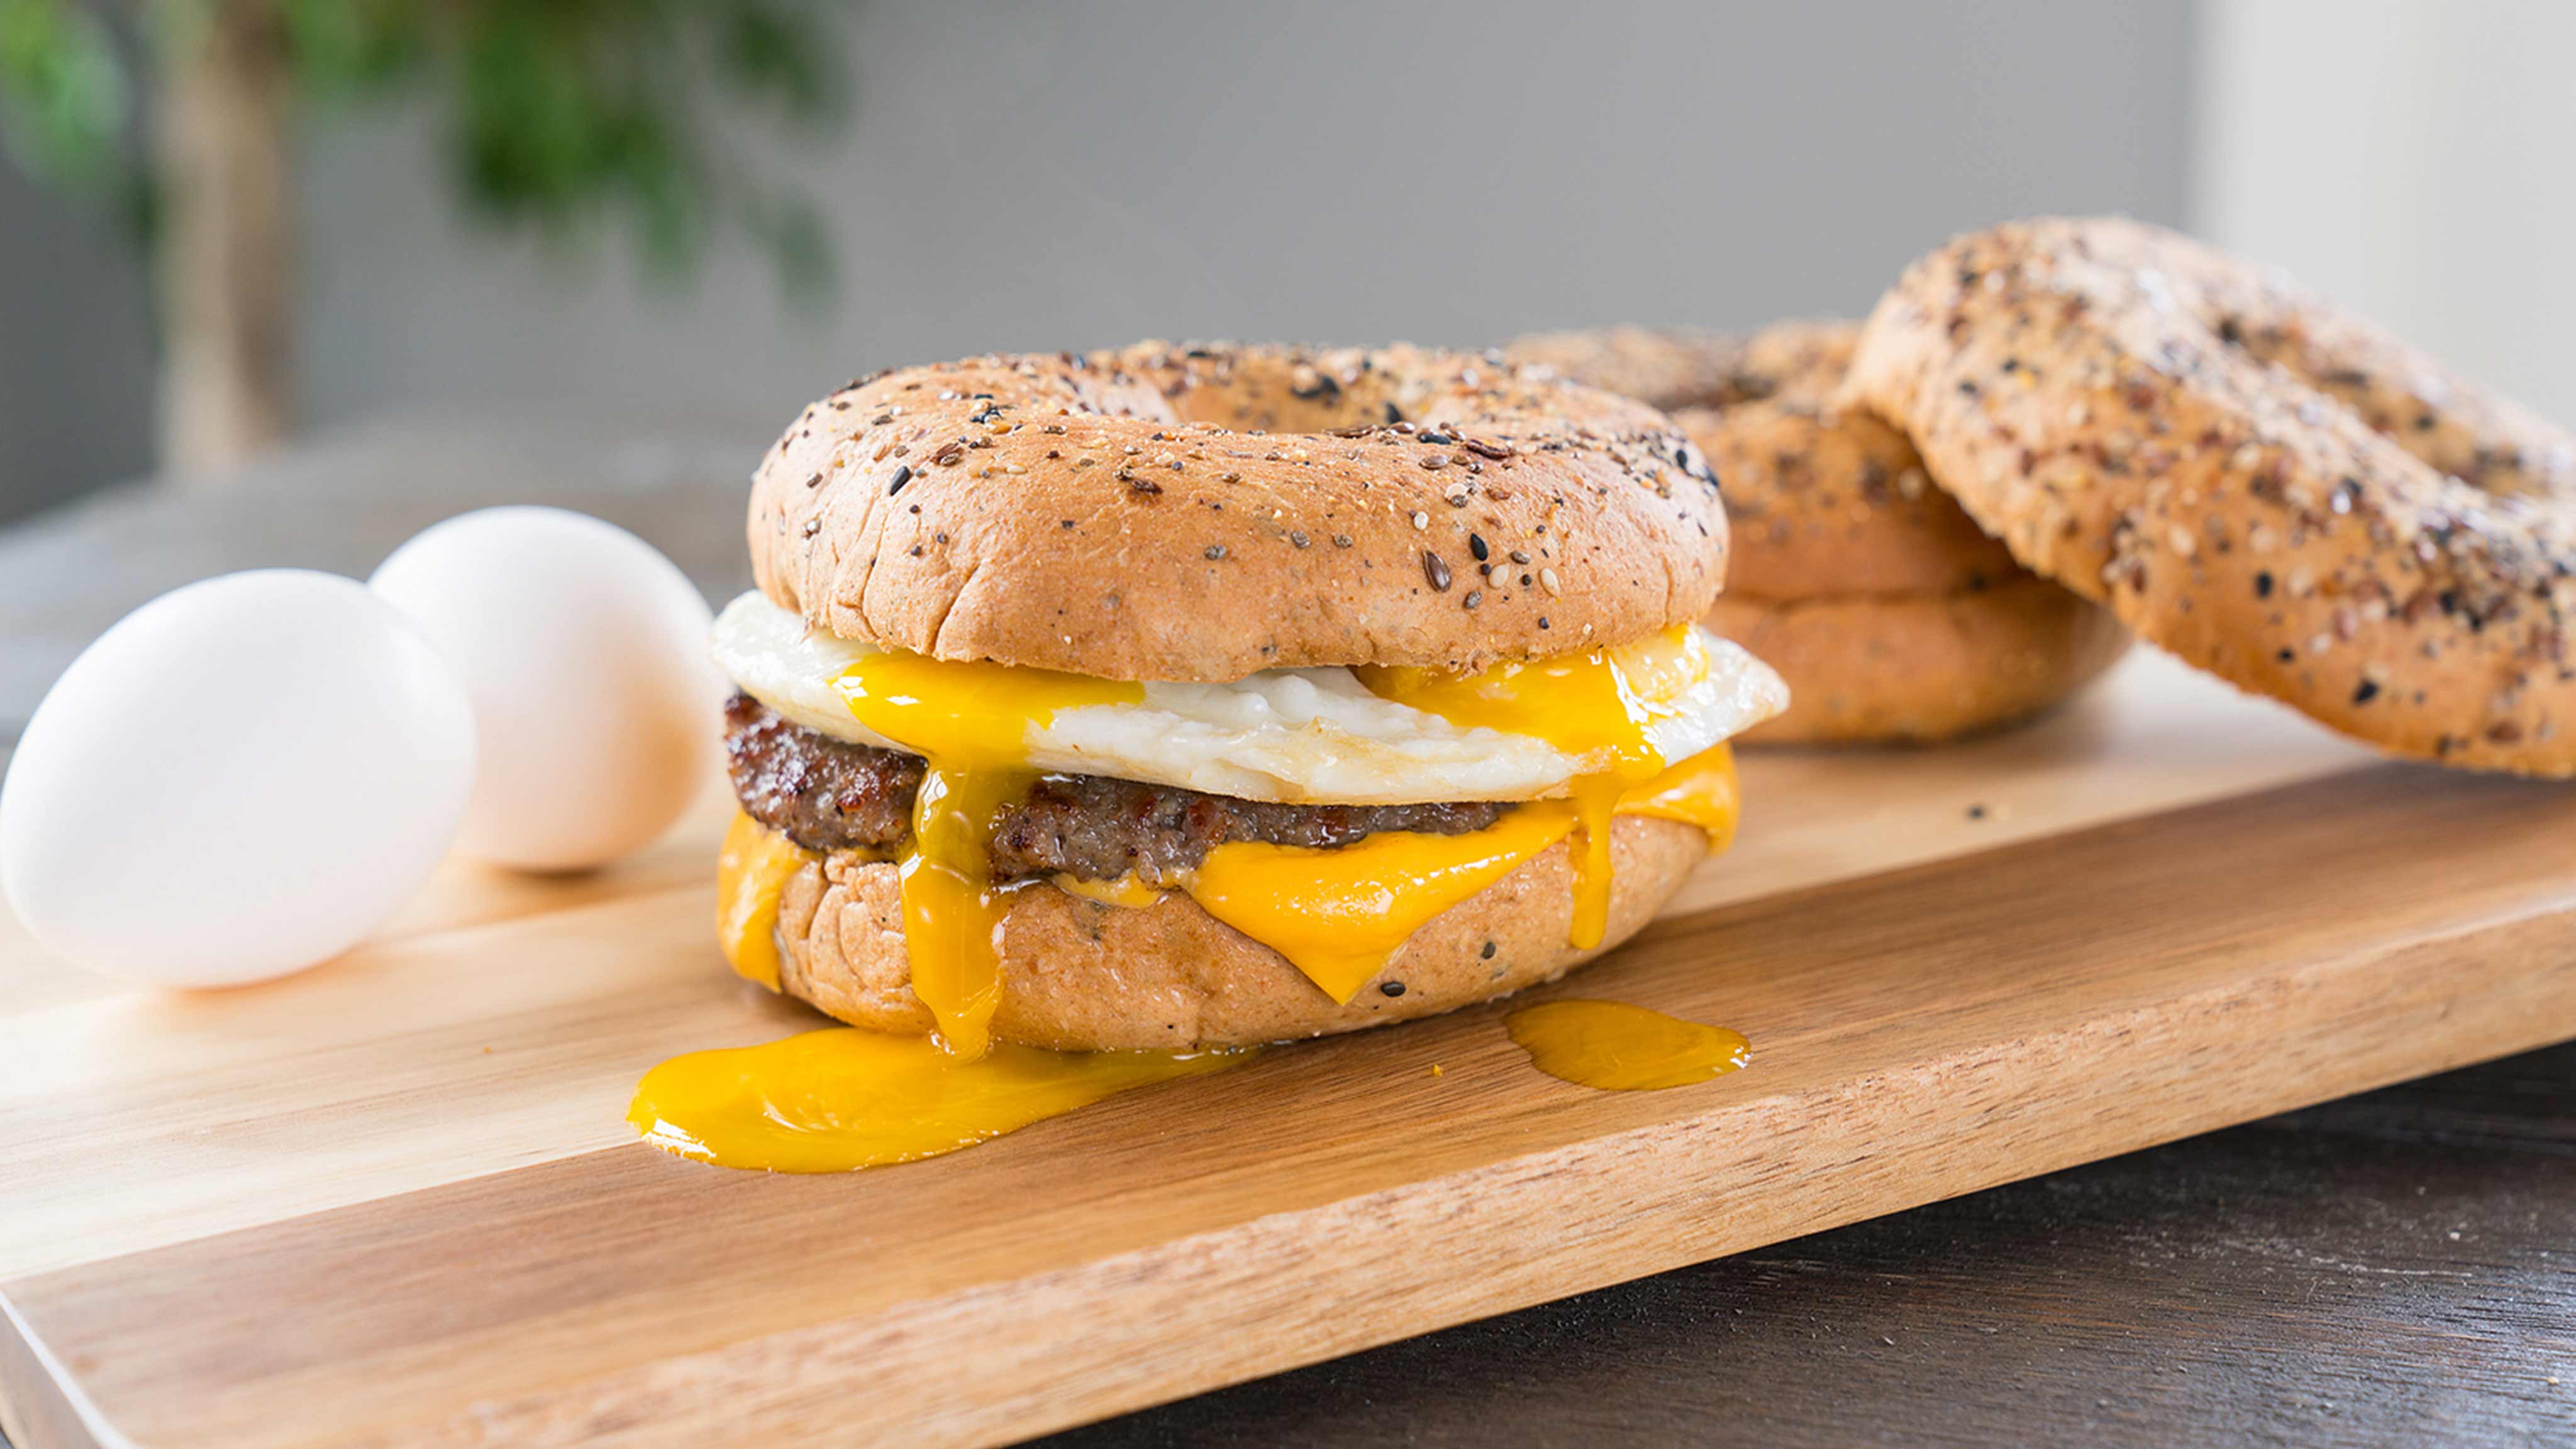 Homeland - Grocery & Pharmacy in Oklahoma - Recipe: Sausage, Egg and Cheese  Breakfast Bagel